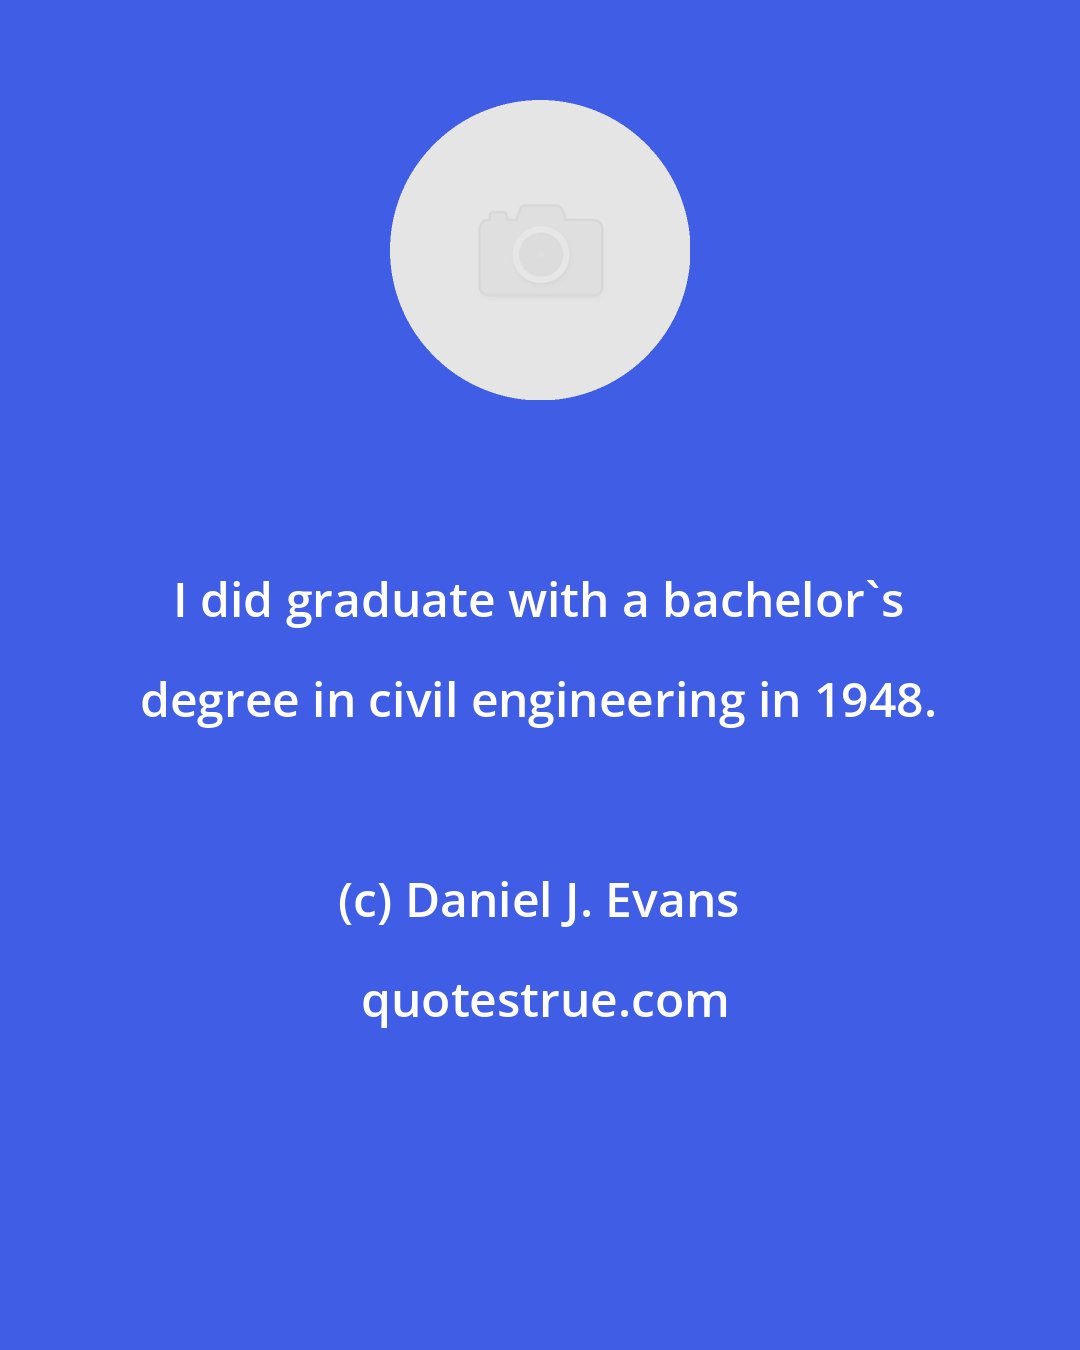 Daniel J. Evans: I did graduate with a bachelor's degree in civil engineering in 1948.